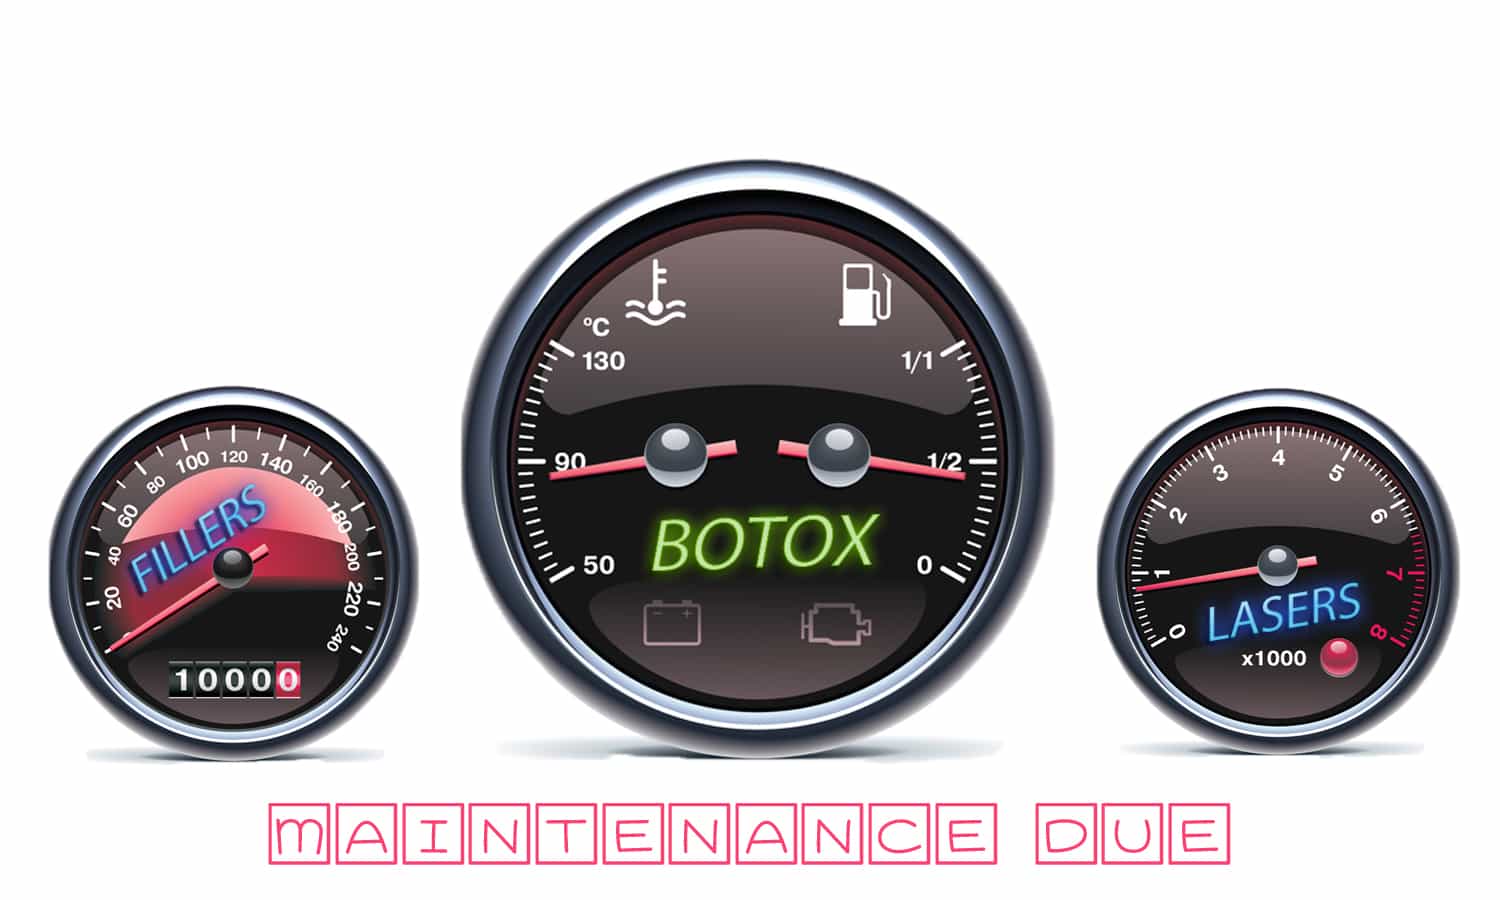 Picture of car gauges that show if you are due for botox, fillers, or laser treatment